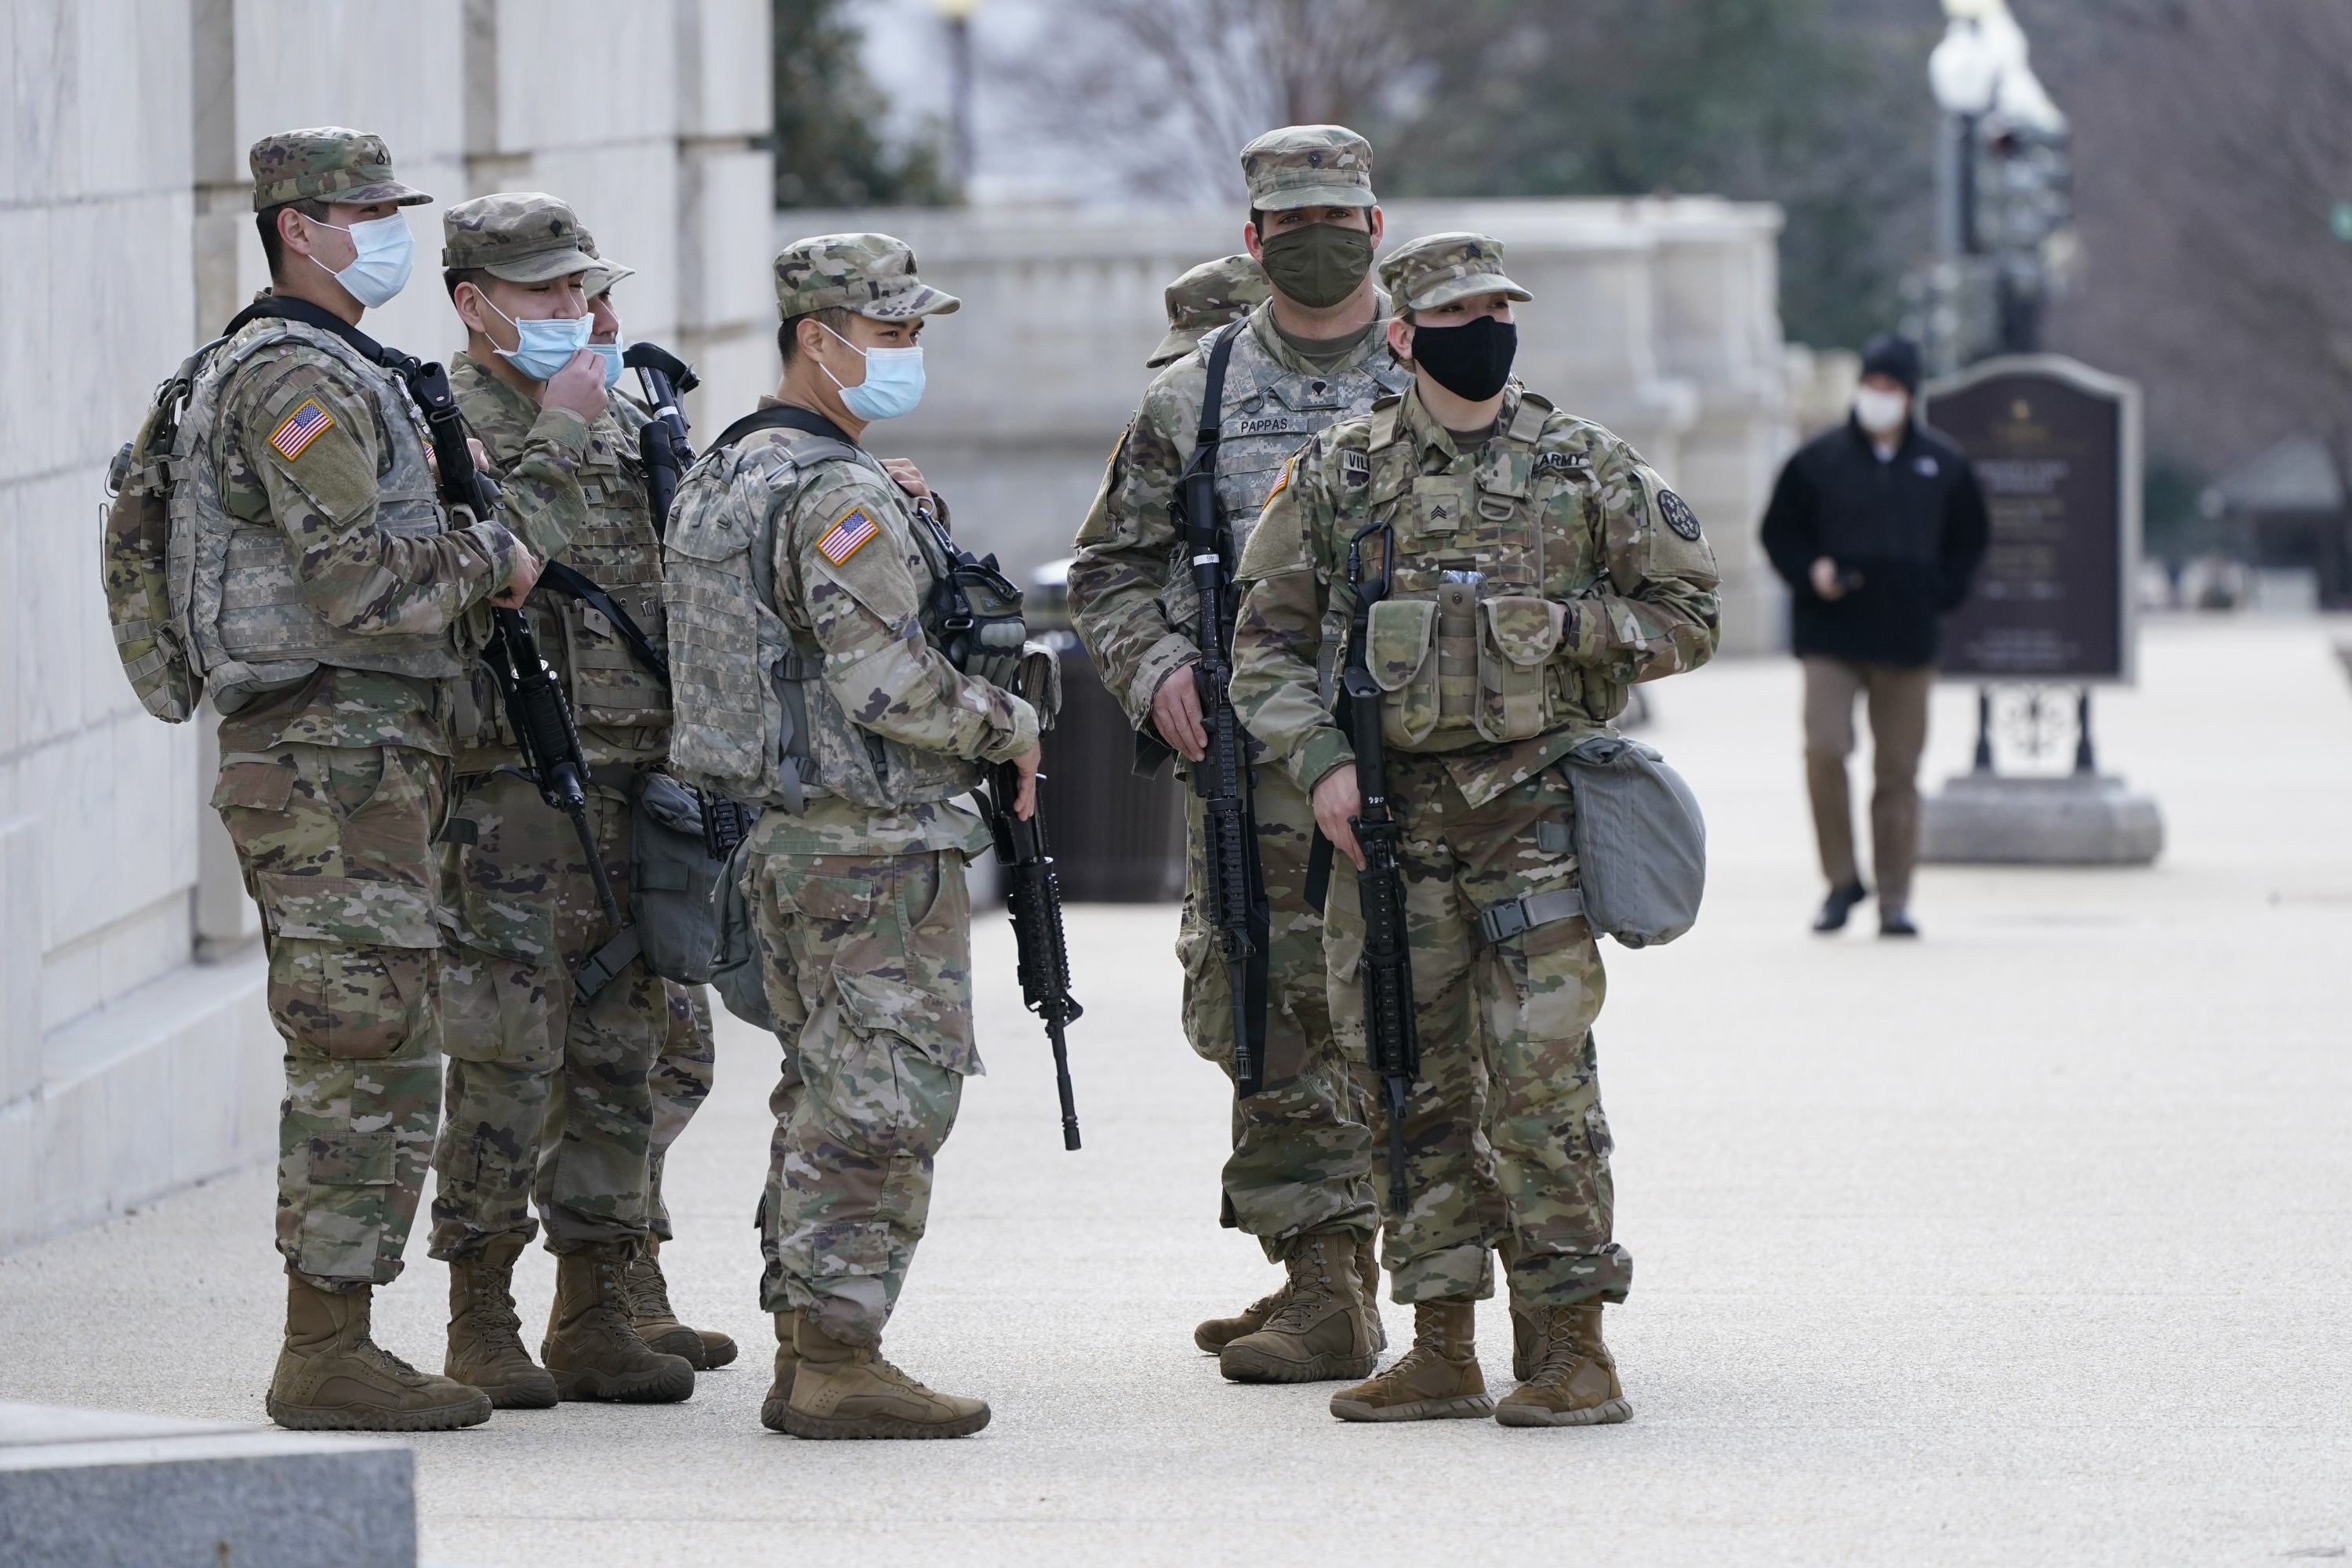 Police call for 60-day extension of Guard at US Capitol